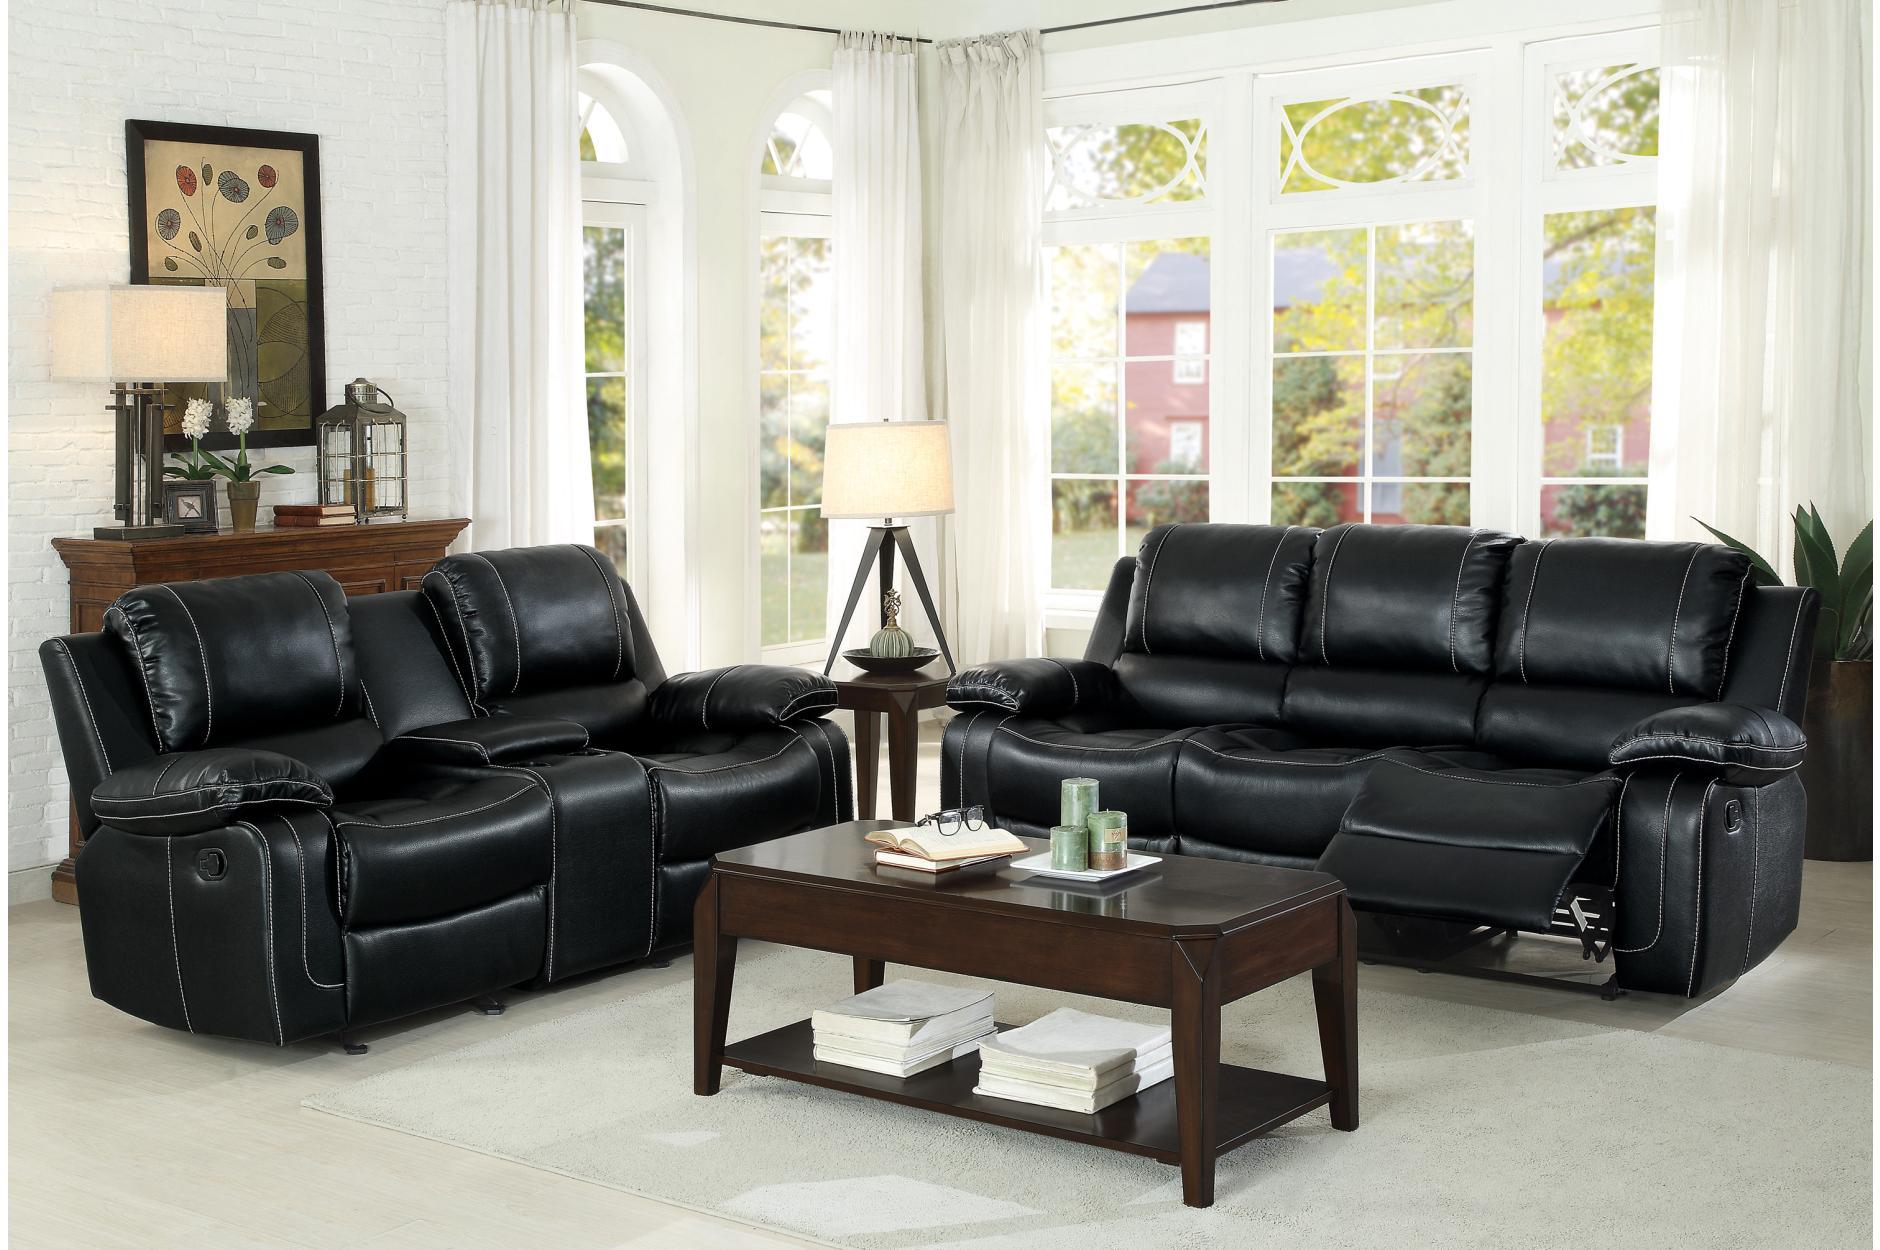 

        
Homelegance Oriole Reclining Sofa and Loveseat Black Faux Leather 00782359385105
